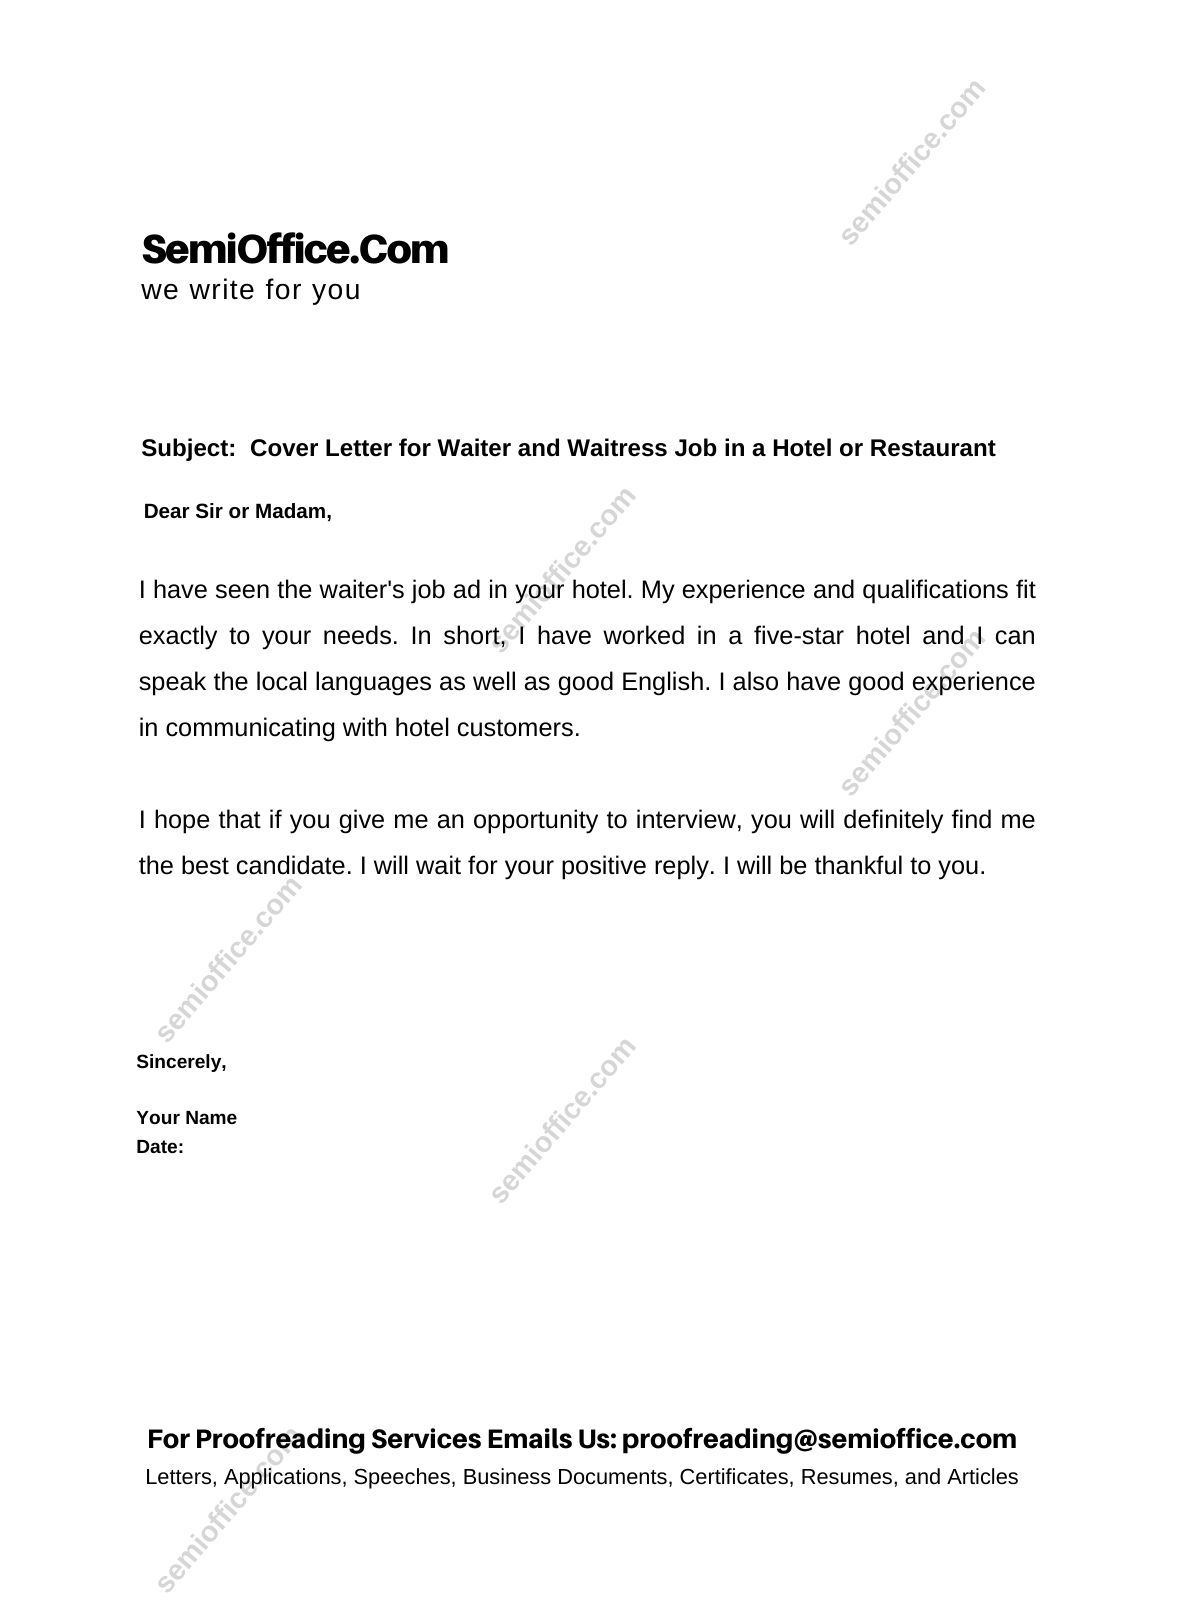 example of a cover letter for waiter